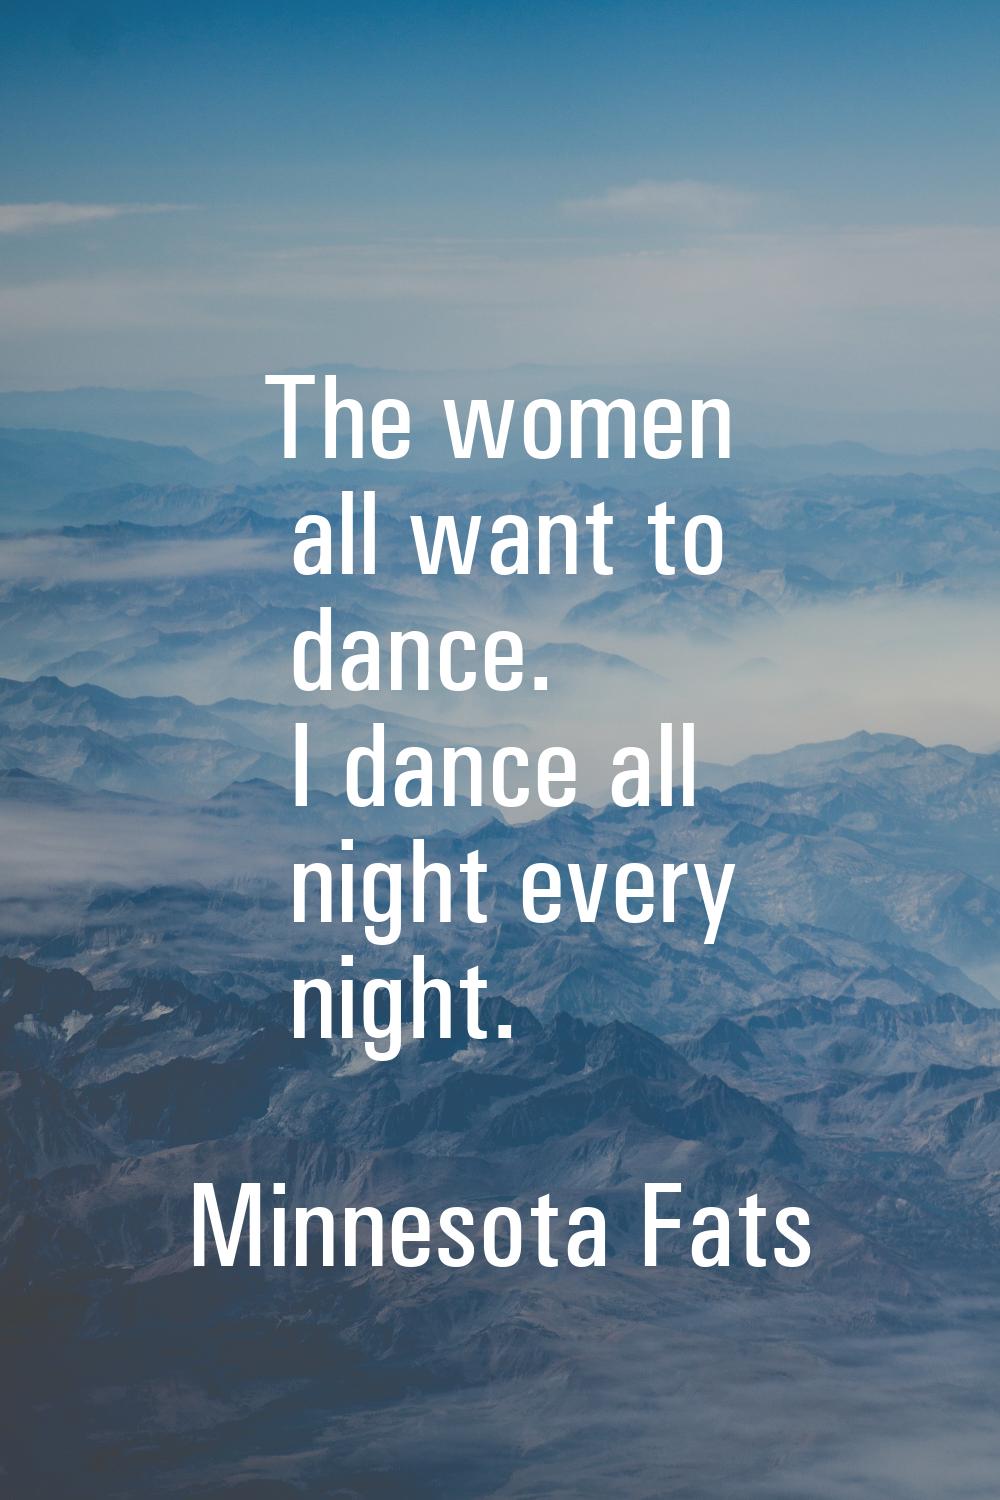 The women all want to dance. I dance all night every night.